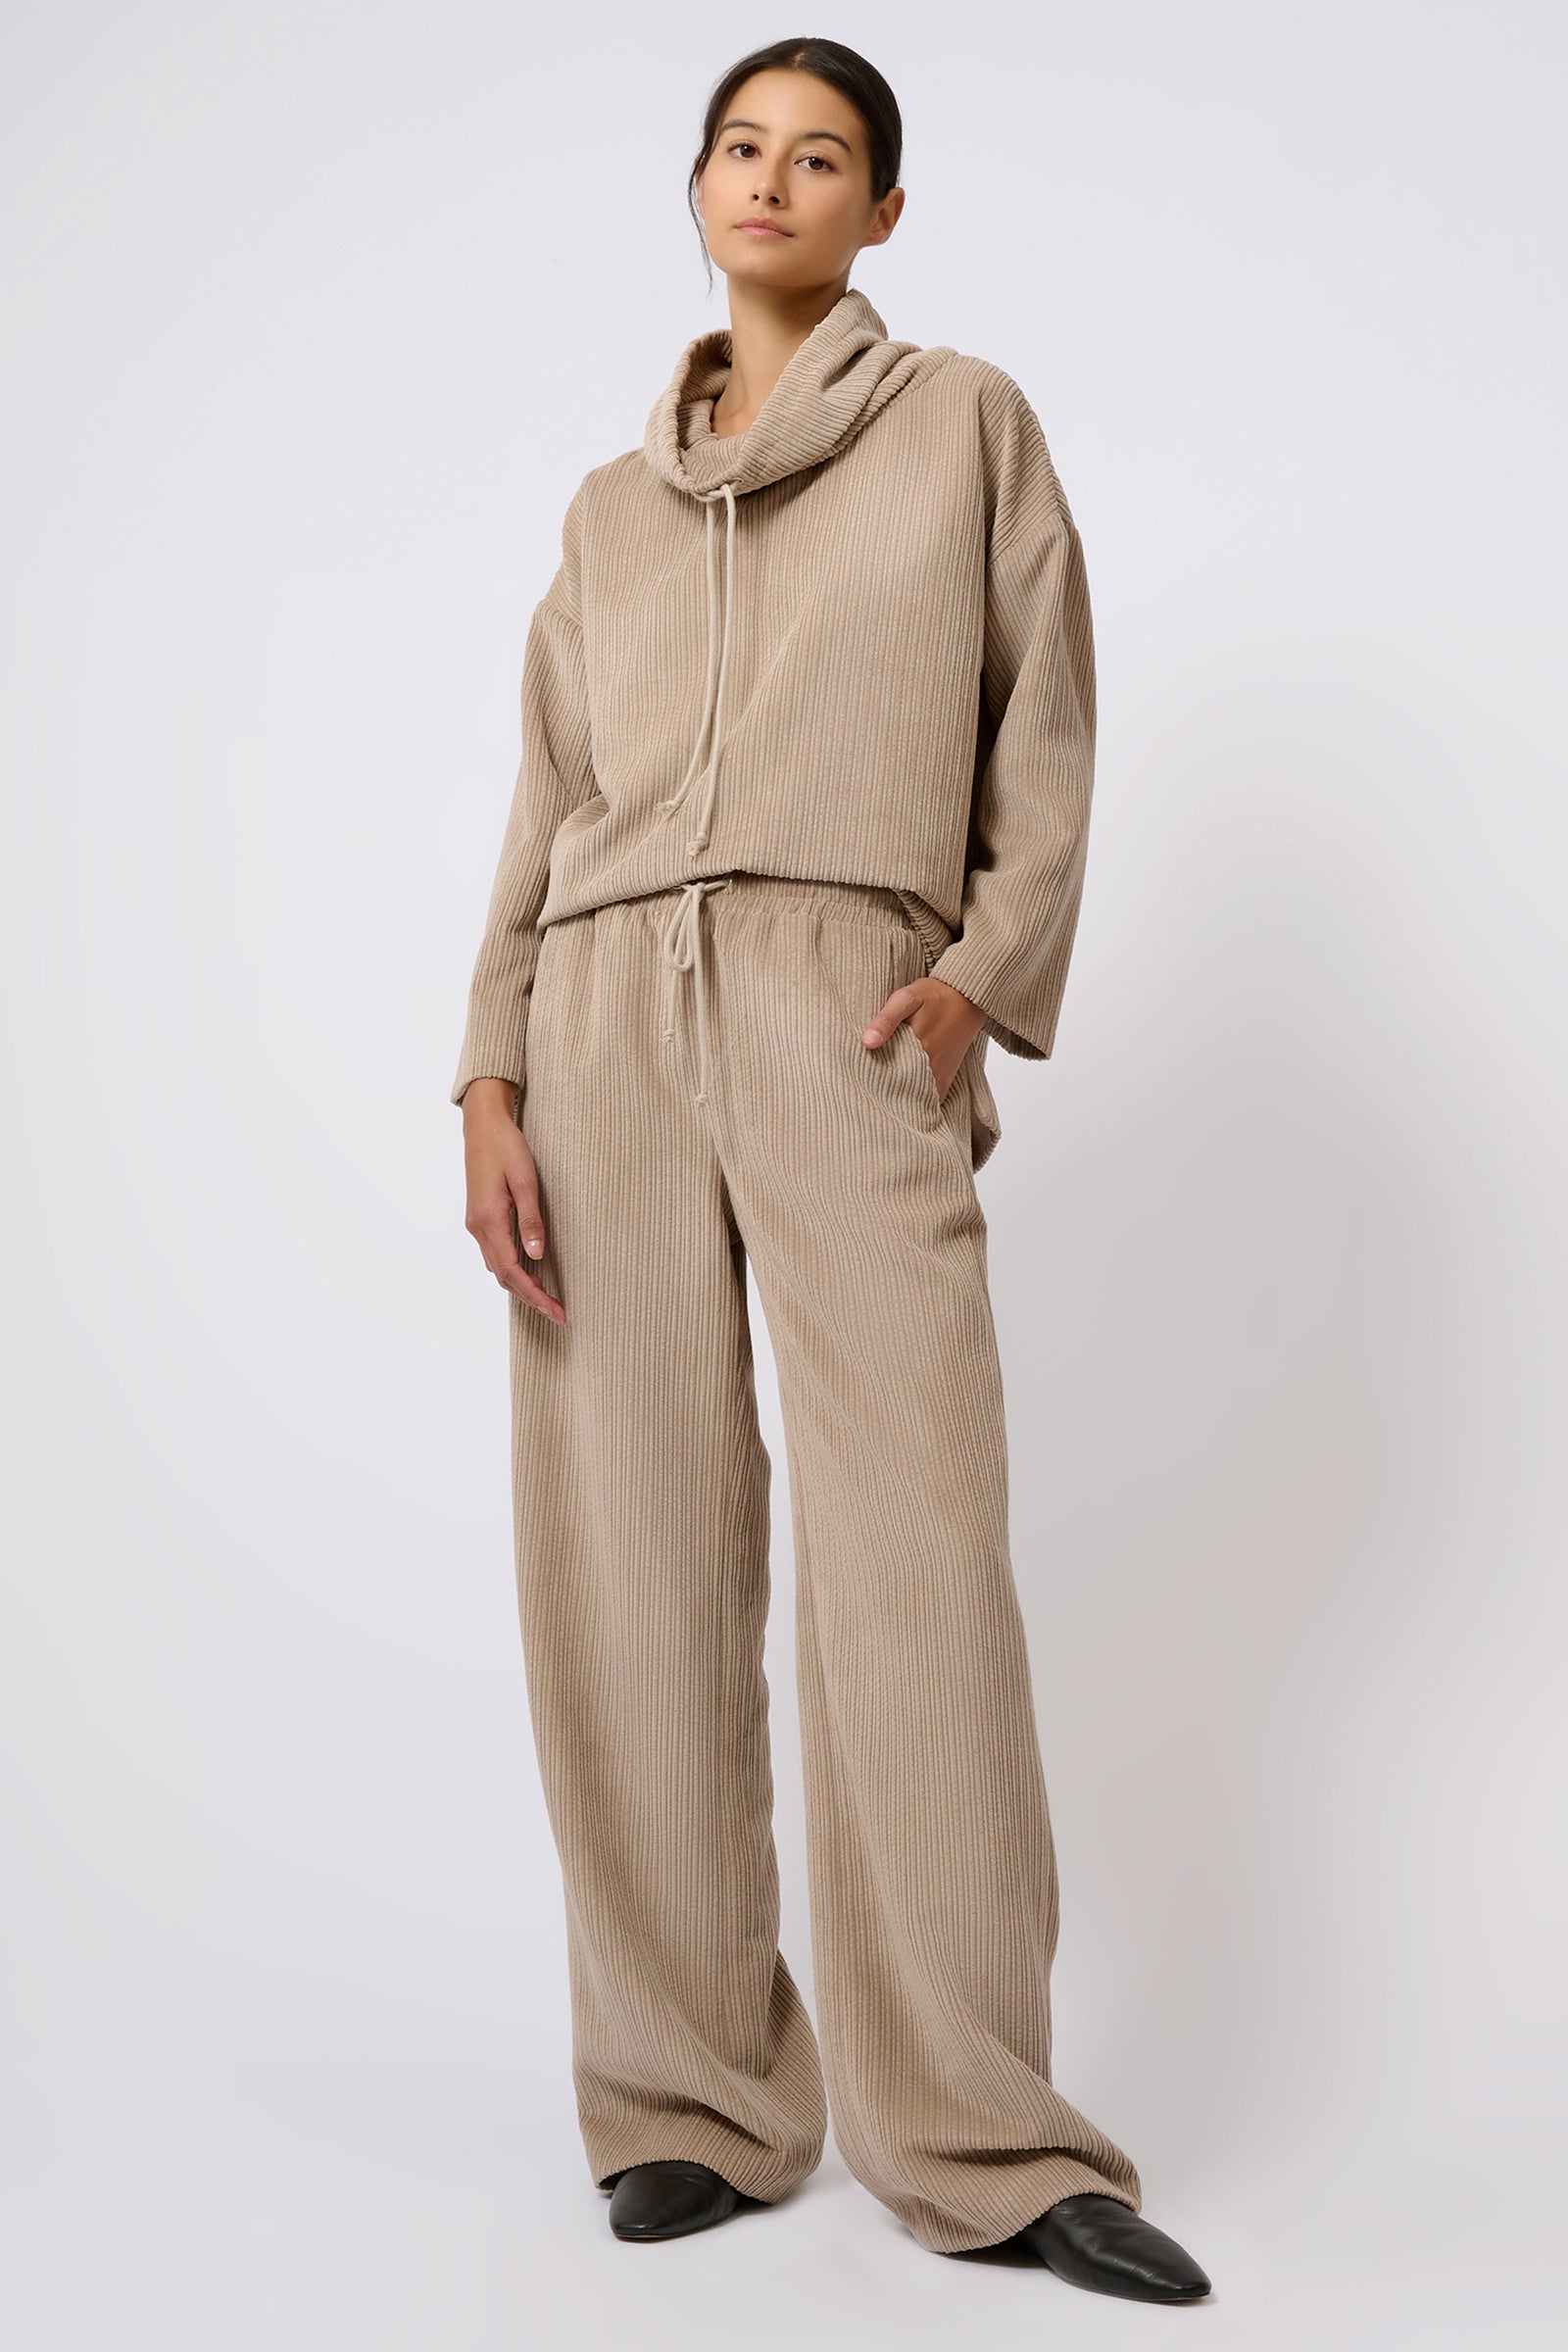 Kal Rieman Debbie Drawstring Pant in Beige on Model with Left Hand in Pocket Full Front View